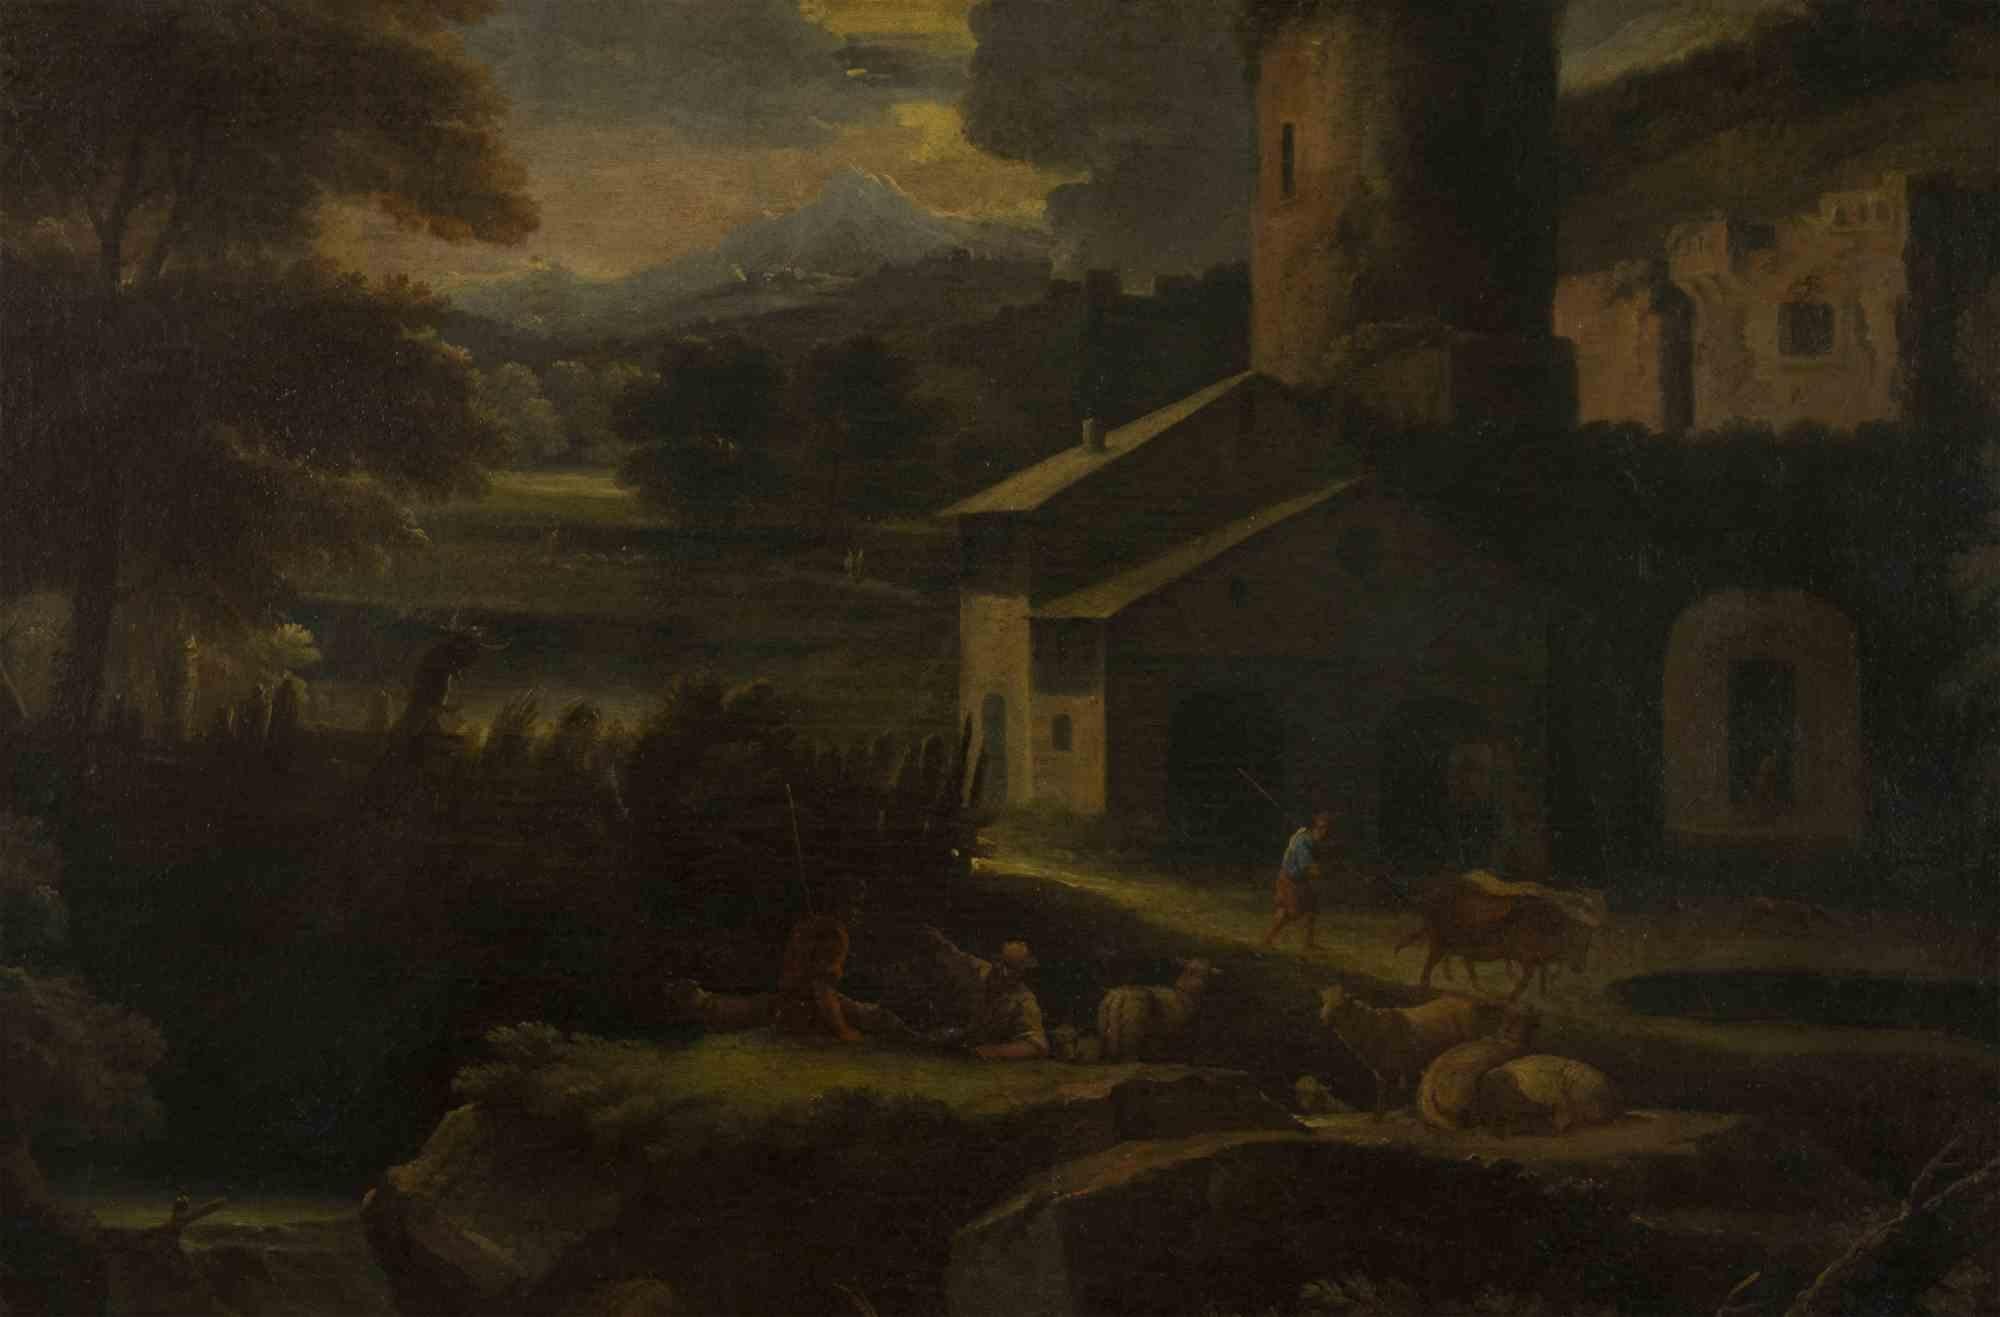 Landscape is an original old master artwork realized in 17th century.

Includes frame (79x 130 cm)

An old master artwork depicting a genre scenes.

Collect a unique artwork!

